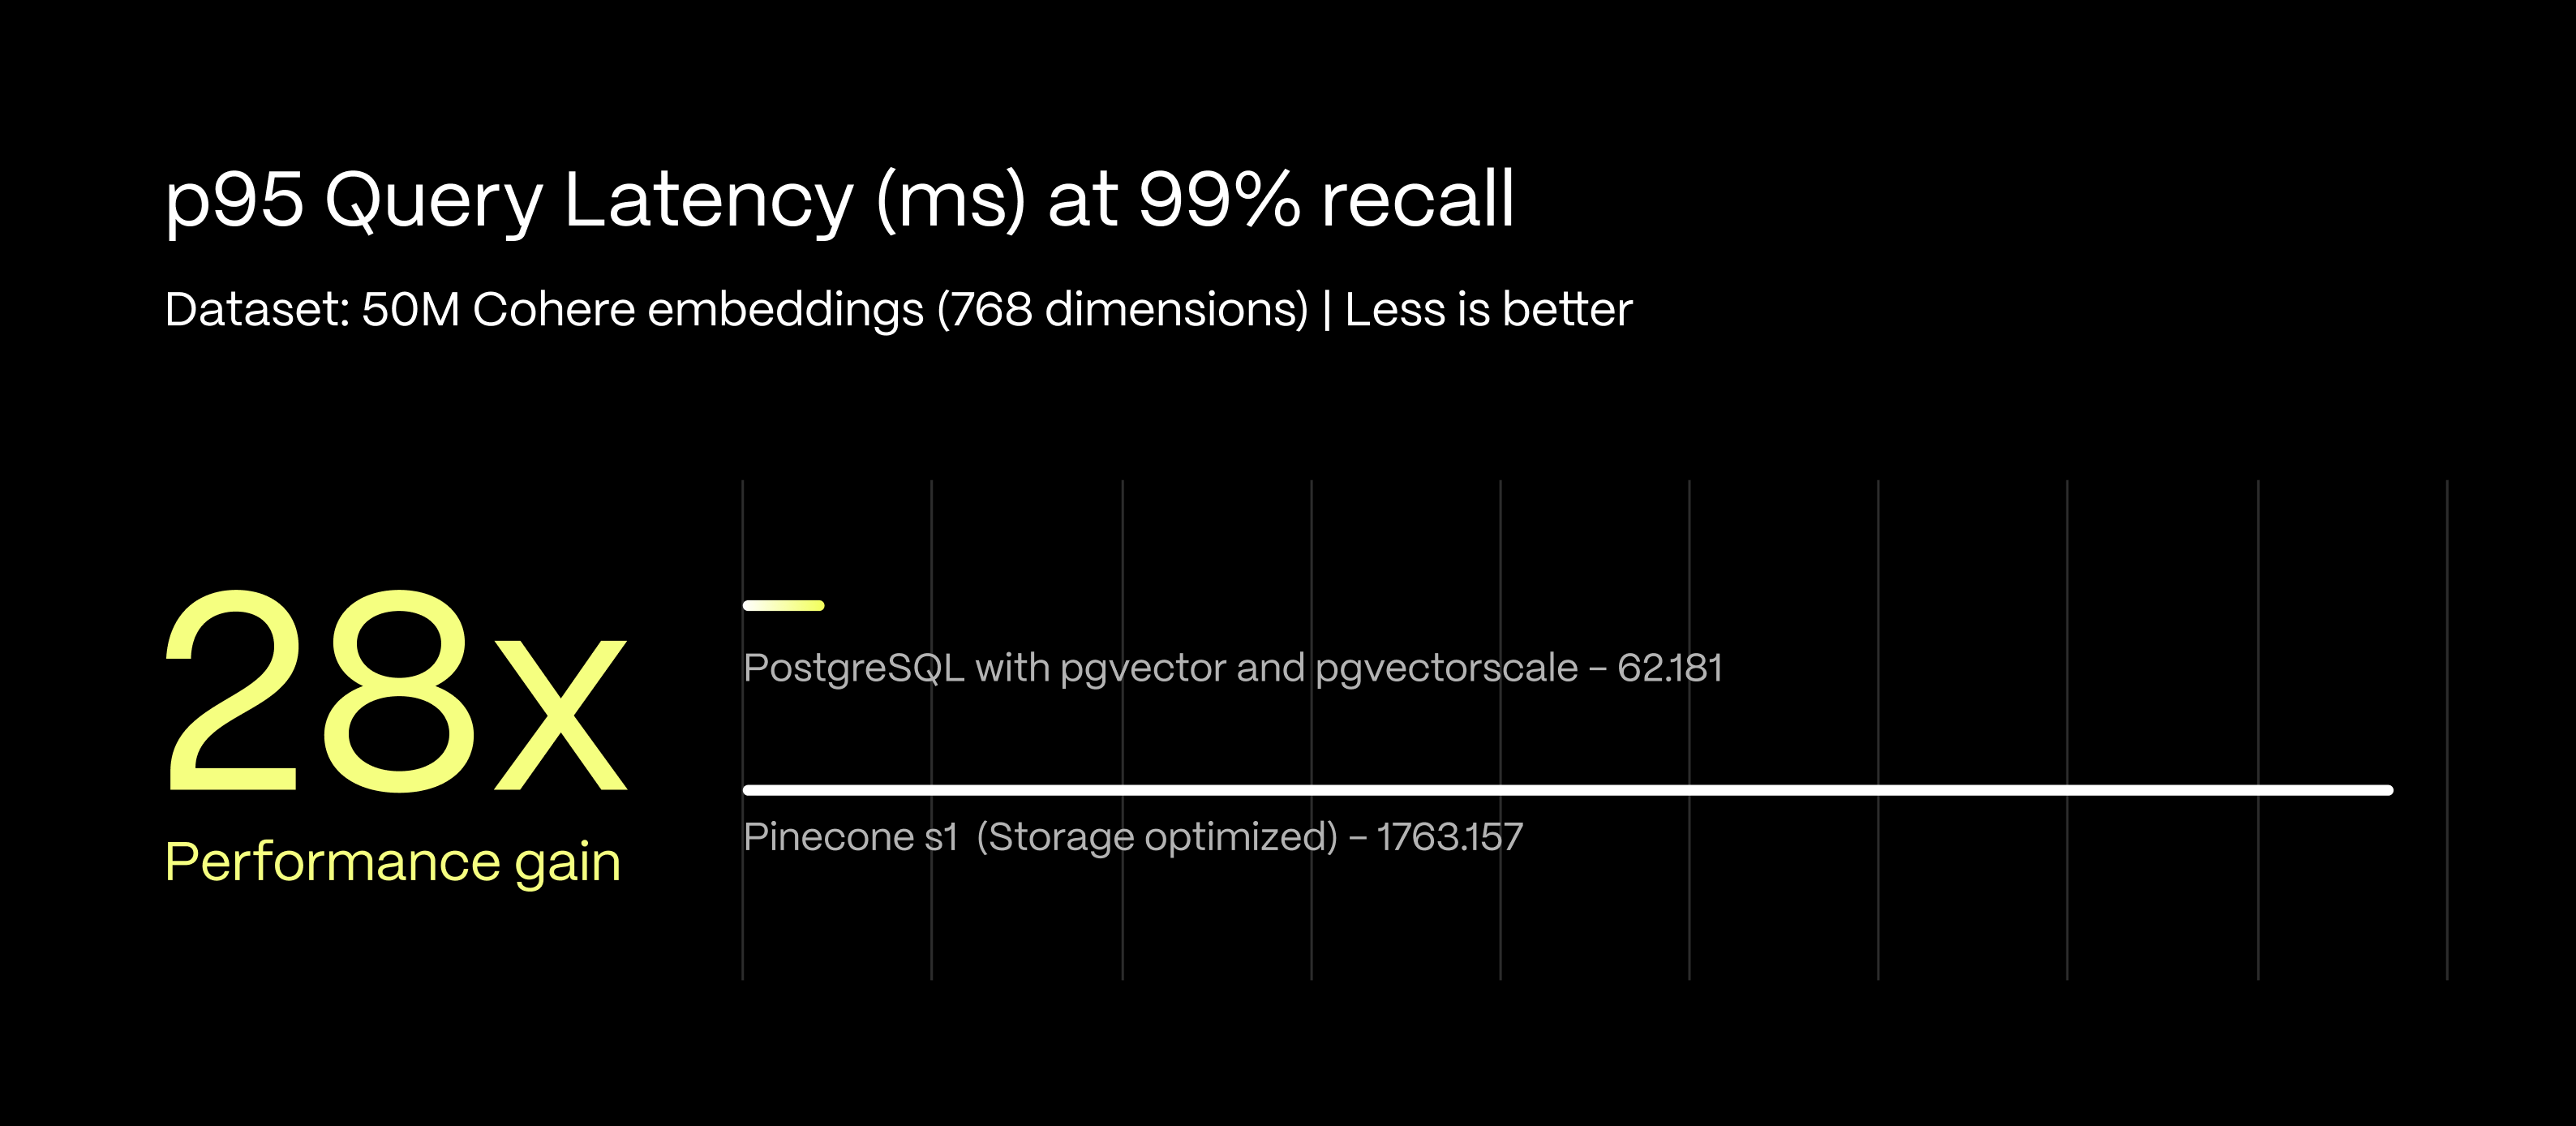 PostgreSQL with pgvector and pgvectorscale extensions outperformed Pinecone’s s1 pod-based index type. Thanks to pgvectorscale, developers can now get comparable (and often superior) performance to specialized vector databases like Pinecone using the open-source general-purpose PostgreSQL database.